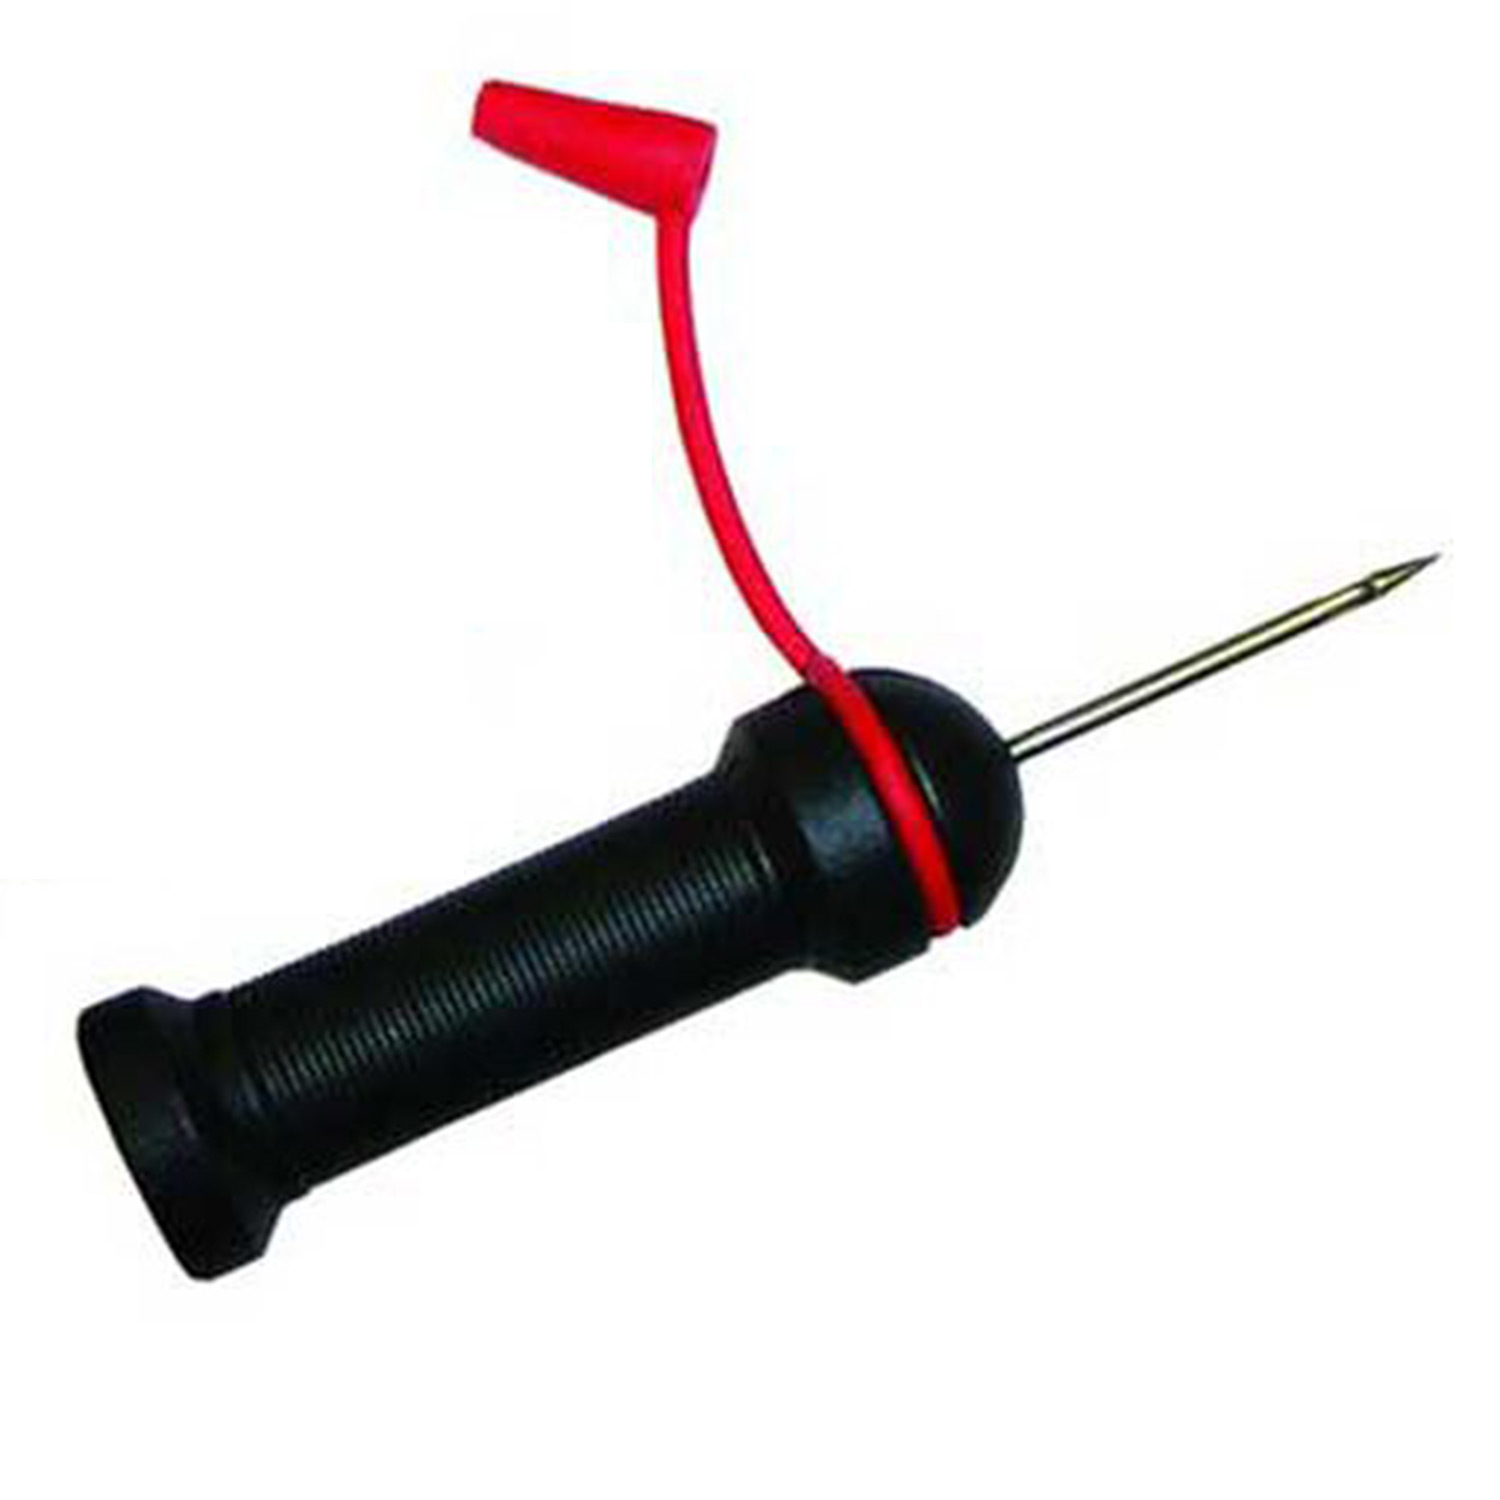 Angler's Choice Venting Tool